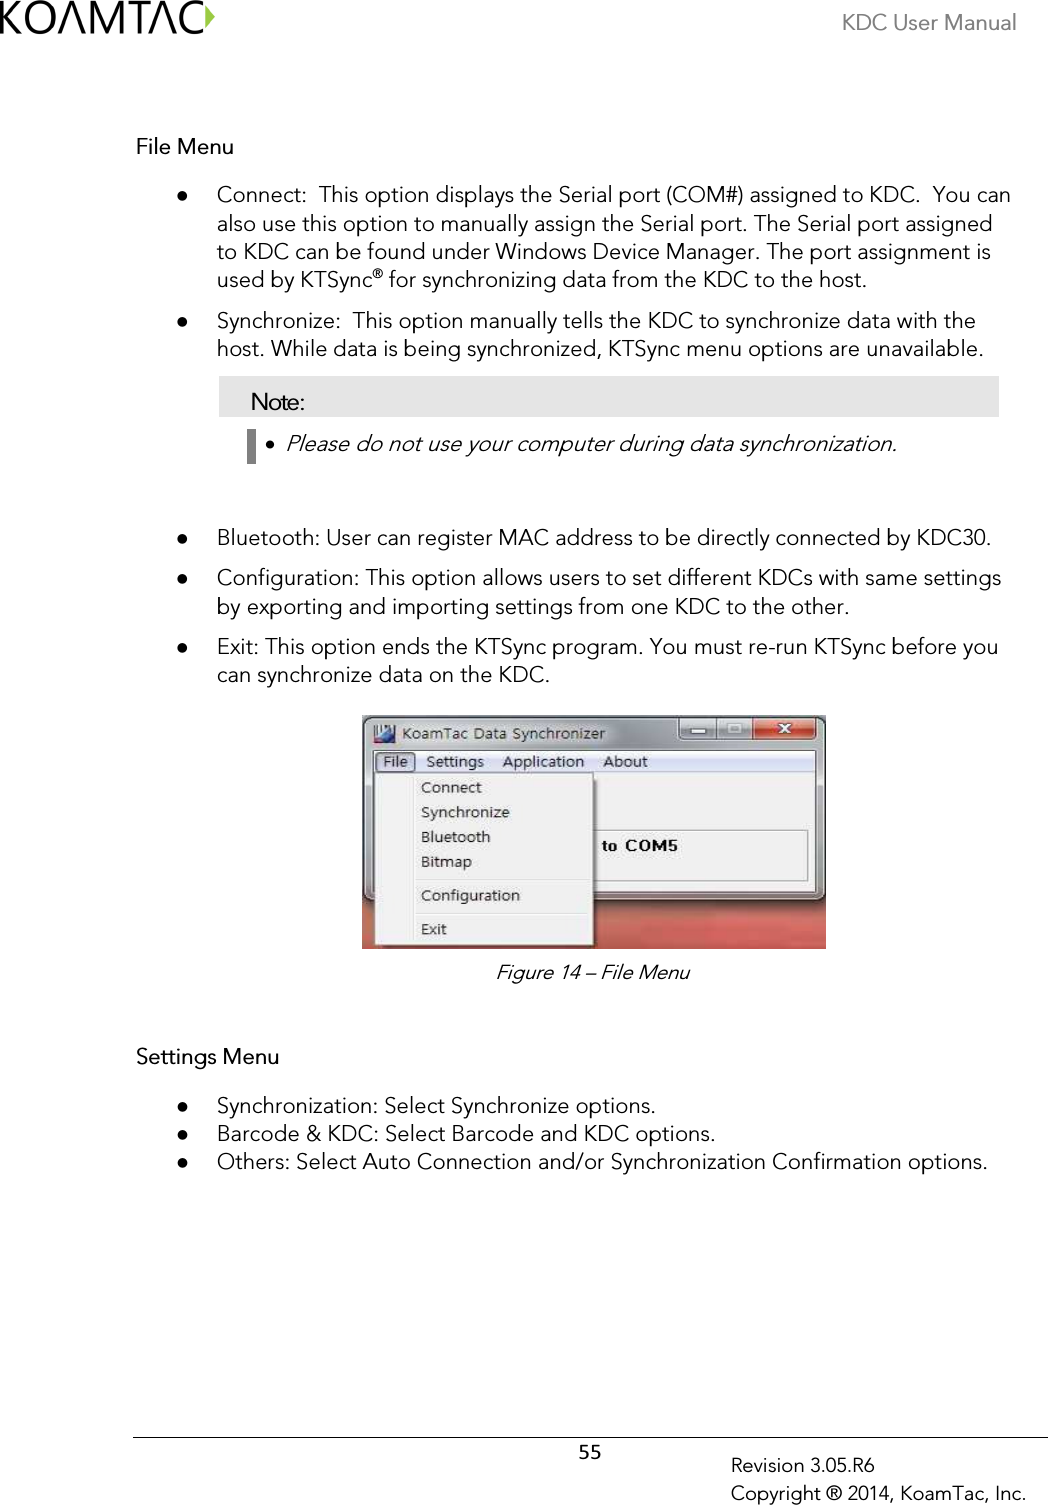 KDC User Manual  55 Revision 3.05.R6 Copyright ® 2014, KoamTac, Inc.  File Menu  Connect:  This option displays the Serial port (COM#) assigned to KDC.  You can also use this option to manually assign the Serial port. The Serial port assigned to KDC can be found under Windows Device Manager. The port assignment is used by KTSync® for synchronizing data from the KDC to the host.  Synchronize:  This option manually tells the KDC to synchronize data with the host. While data is being synchronized, KTSync menu options are unavailable. Note: •  Please do not use your computer during data synchronization.    Bluetooth: User can register MAC address to be directly connected by KDC30.  Configuration: This option allows users to set different KDCs with same settings by exporting and importing settings from one KDC to the other.   Exit: This option ends the KTSync program. You must re-run KTSync before you can synchronize data on the KDC.          Settings Menu  Synchronization: Select Synchronize options.  Barcode &amp; KDC: Select Barcode and KDC options.  Others: Select Auto Connection and/or Synchronization Confirmation options.  Figure 14 – File Menu 